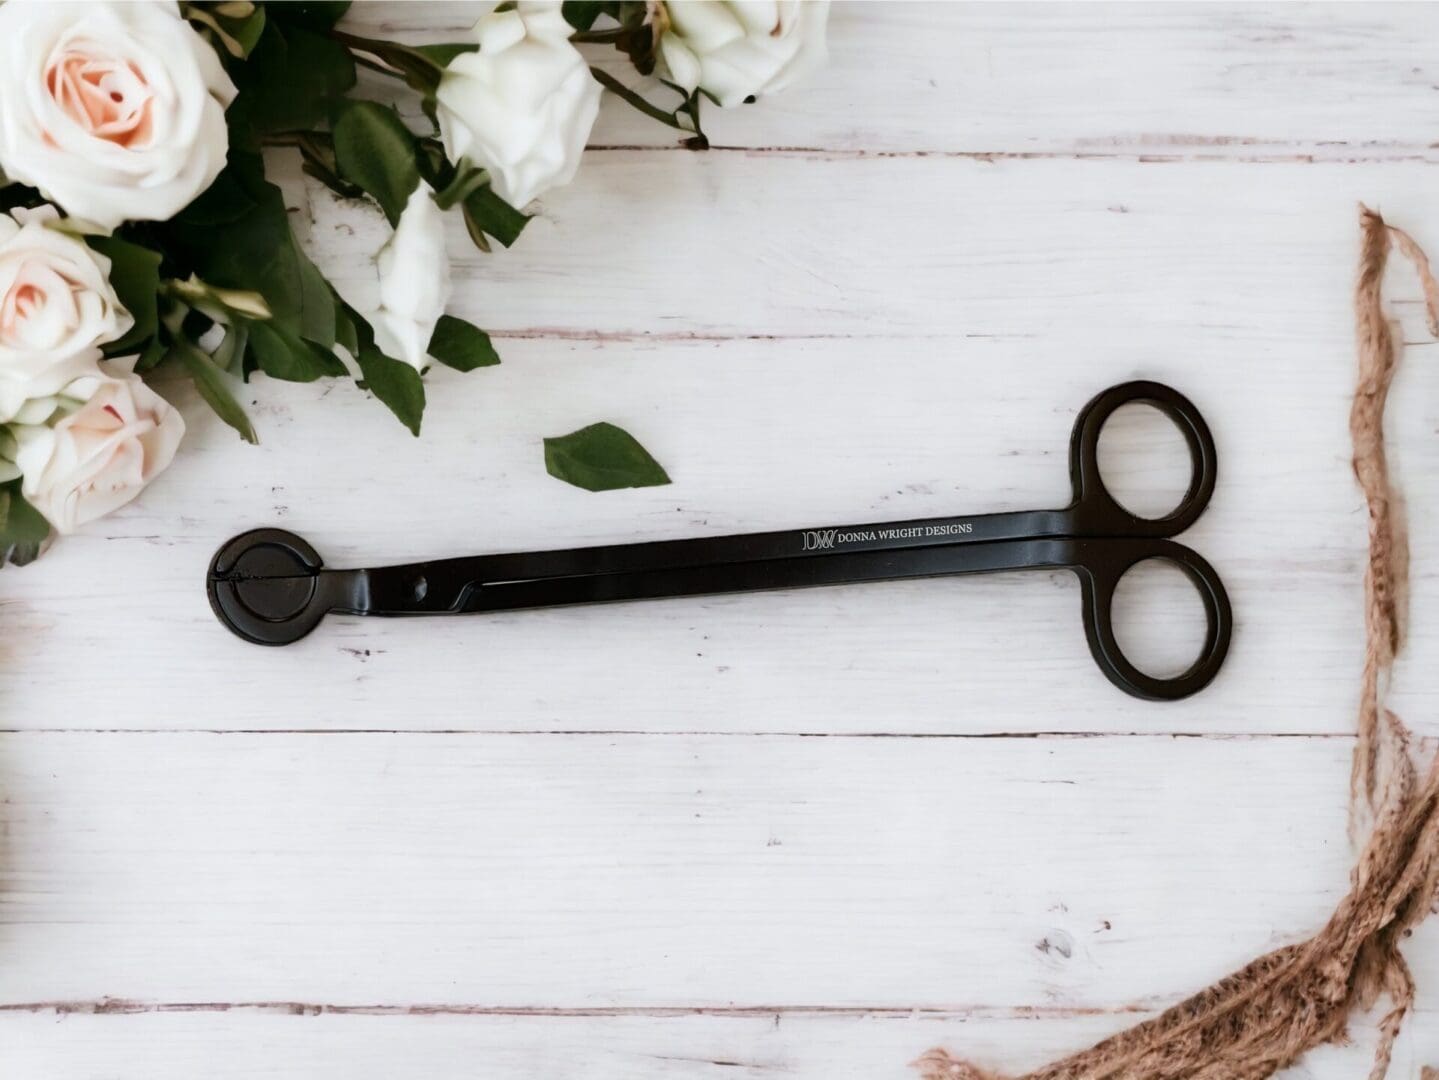 Donna Wright Designs A pair of black scissors lying next to twine and white roses on a wooden surface, accompanied by a Candle Wick Trimmer.